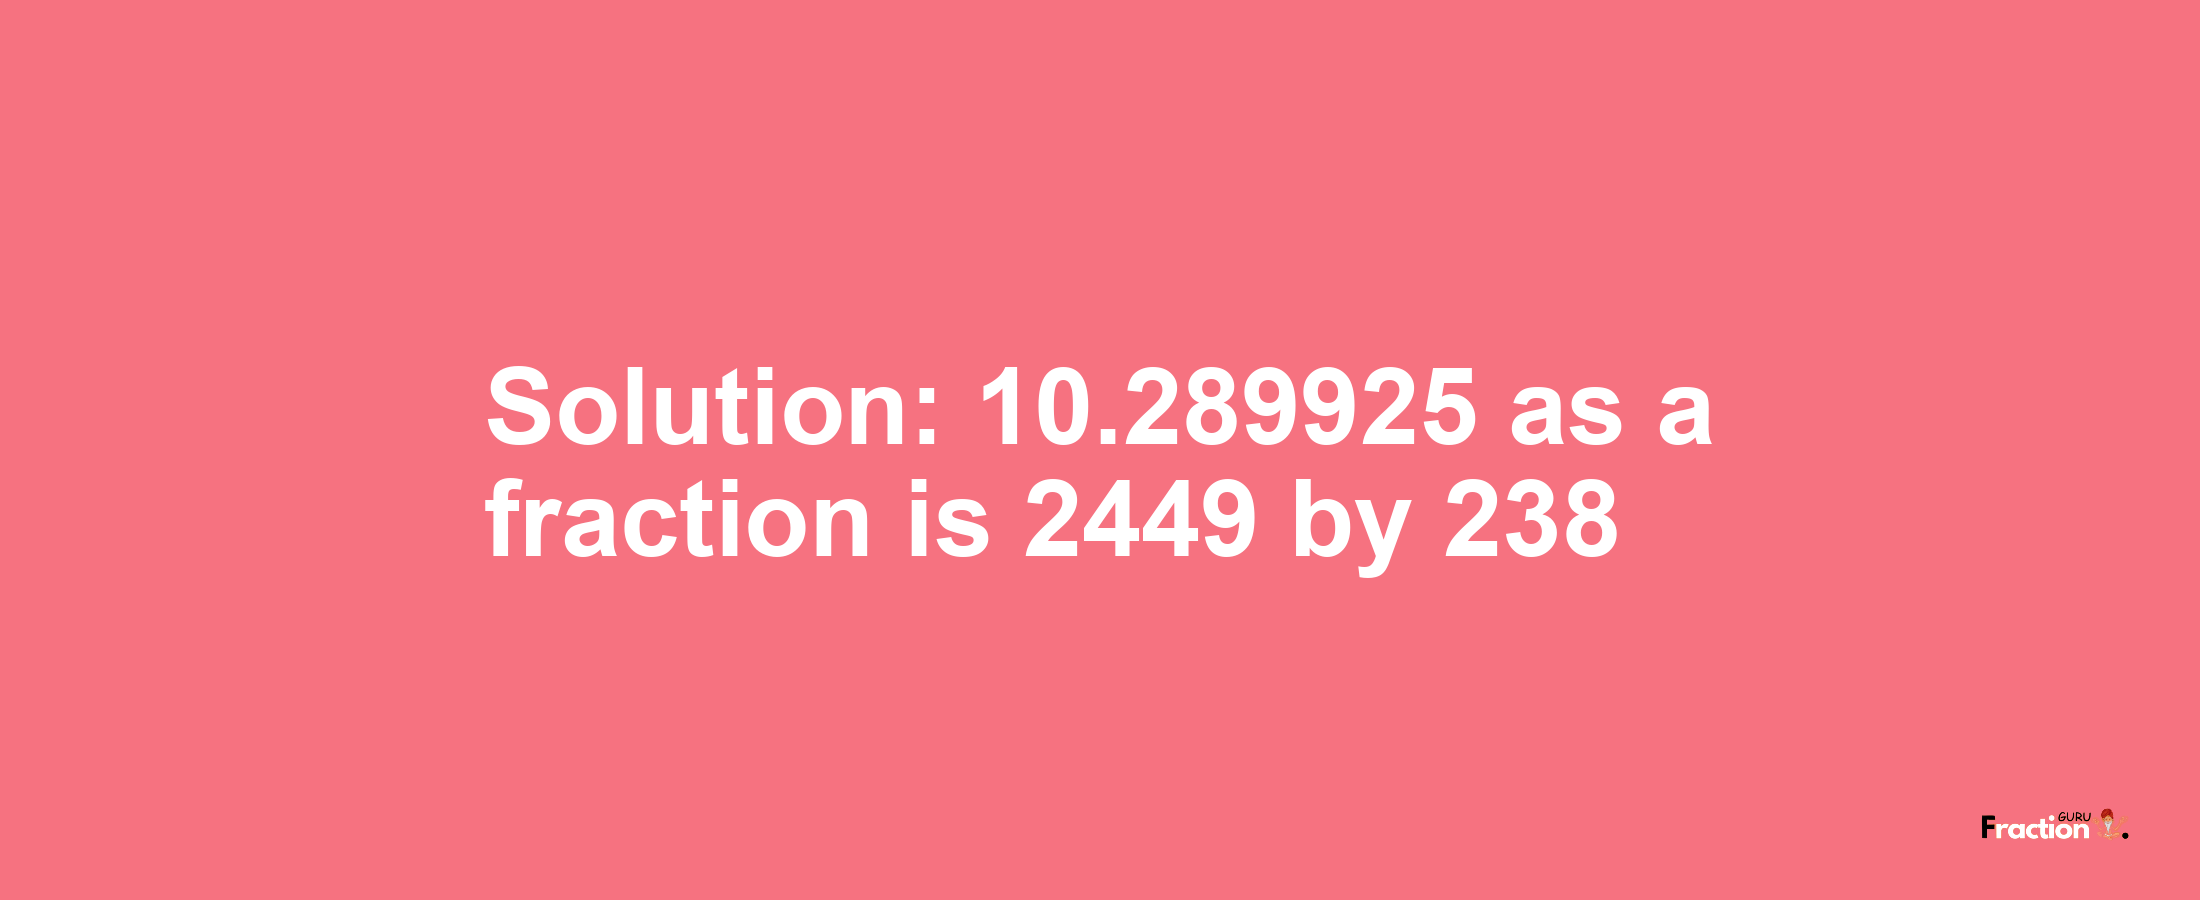 Solution:10.289925 as a fraction is 2449/238